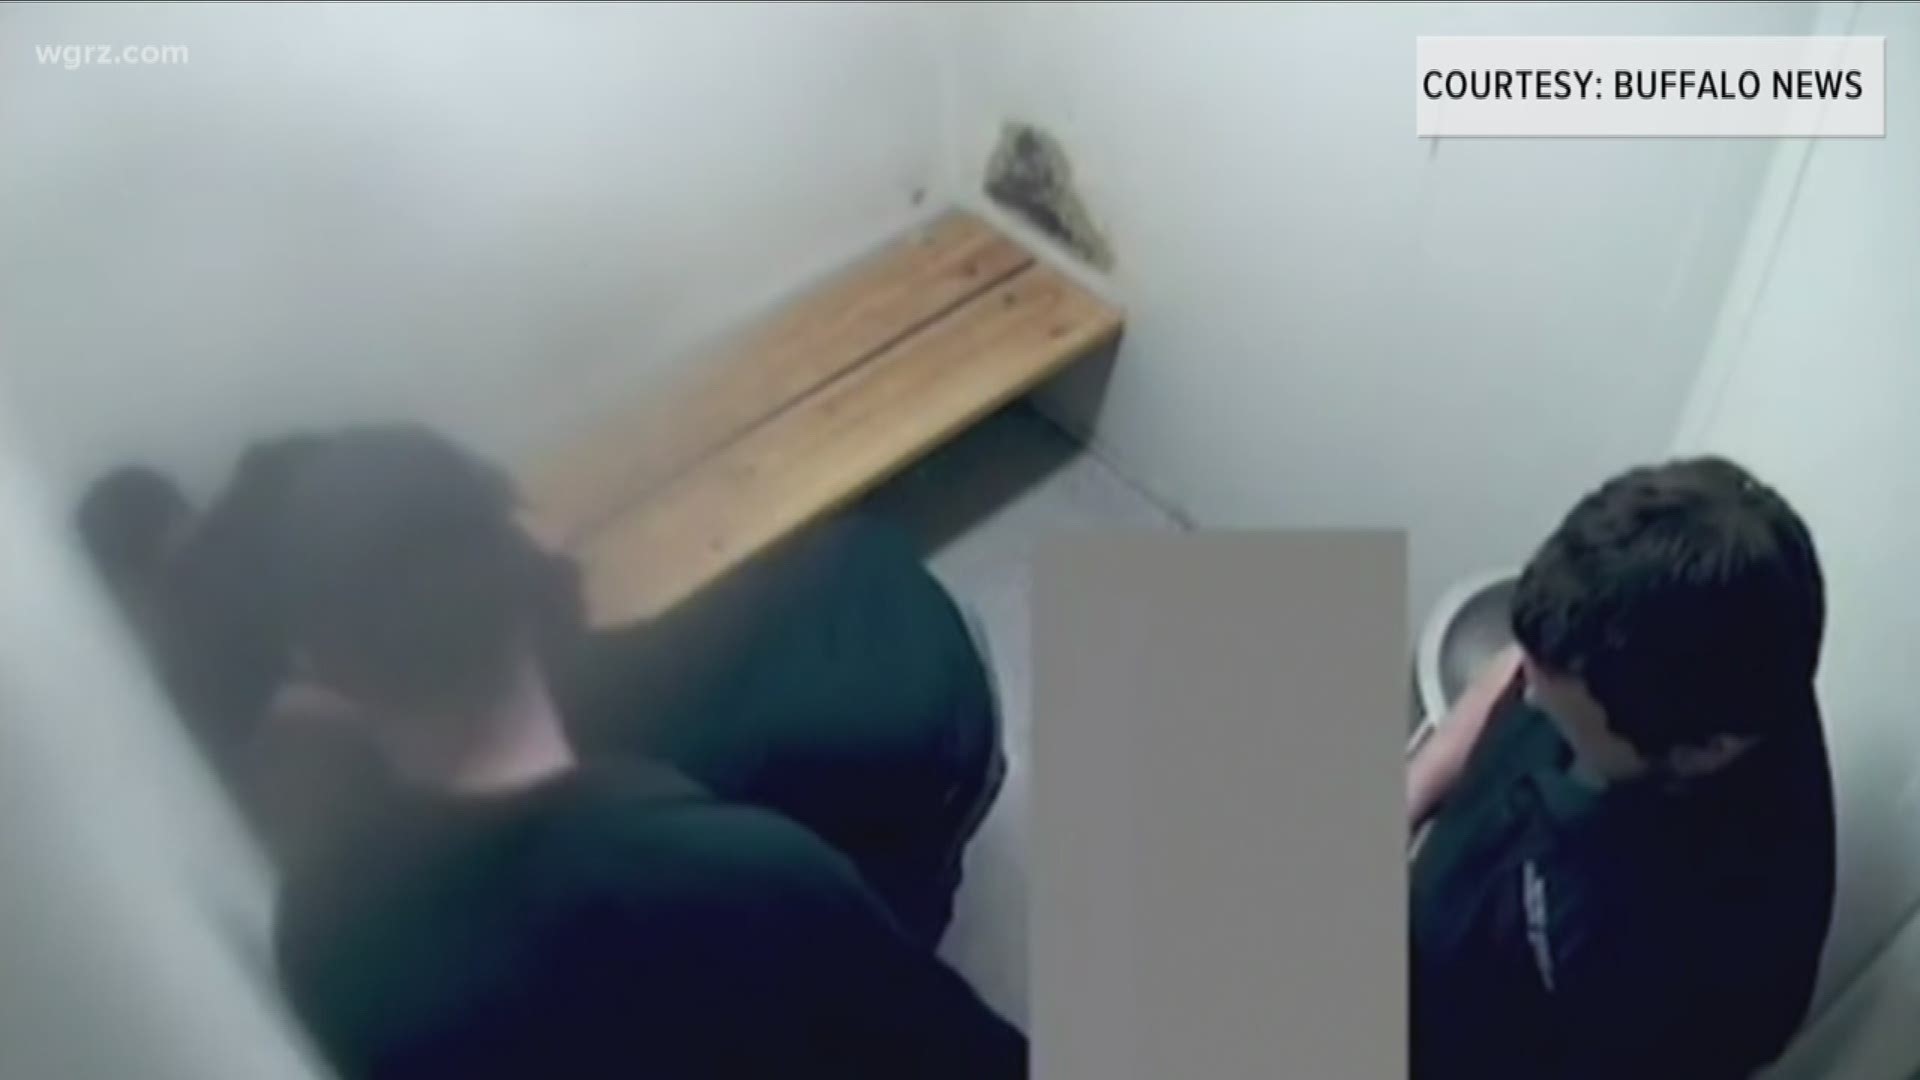 City of Buffalo releases video of police lockup abuse to Buffalo News